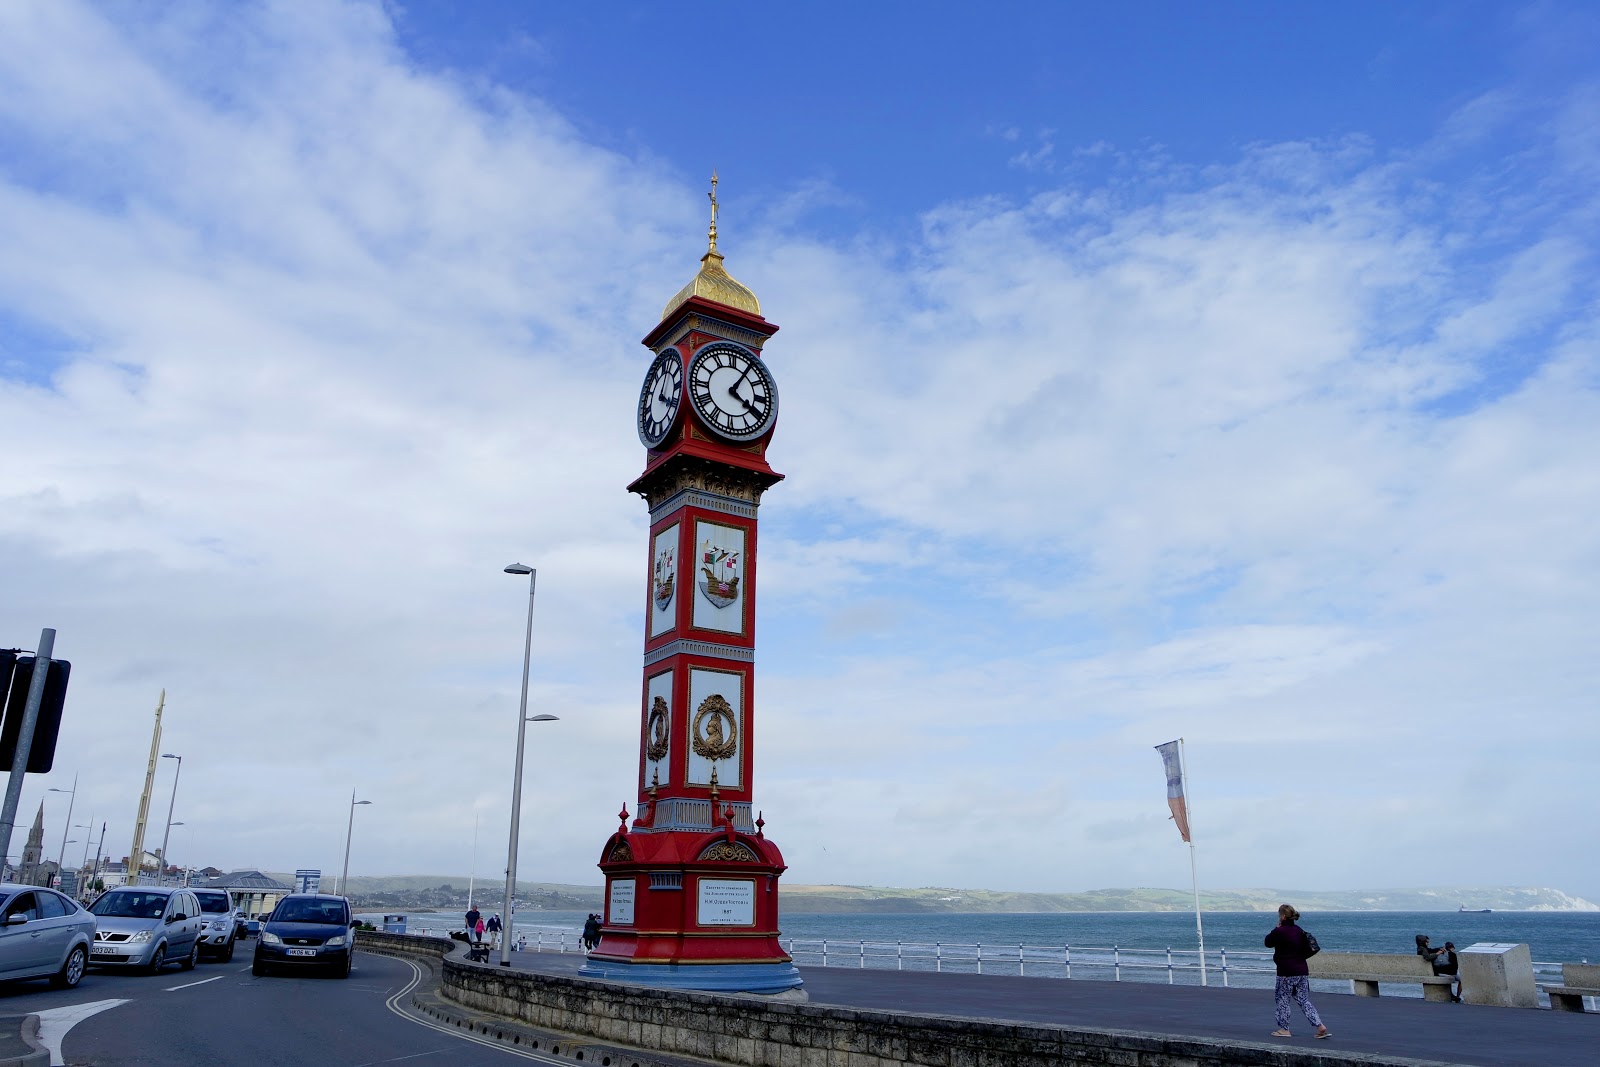 Weymouth, things to see, pastel harbour, beach, seahouses, dorset, england, uk, holiday, jubilee clock tower, skyline, beaches houses,